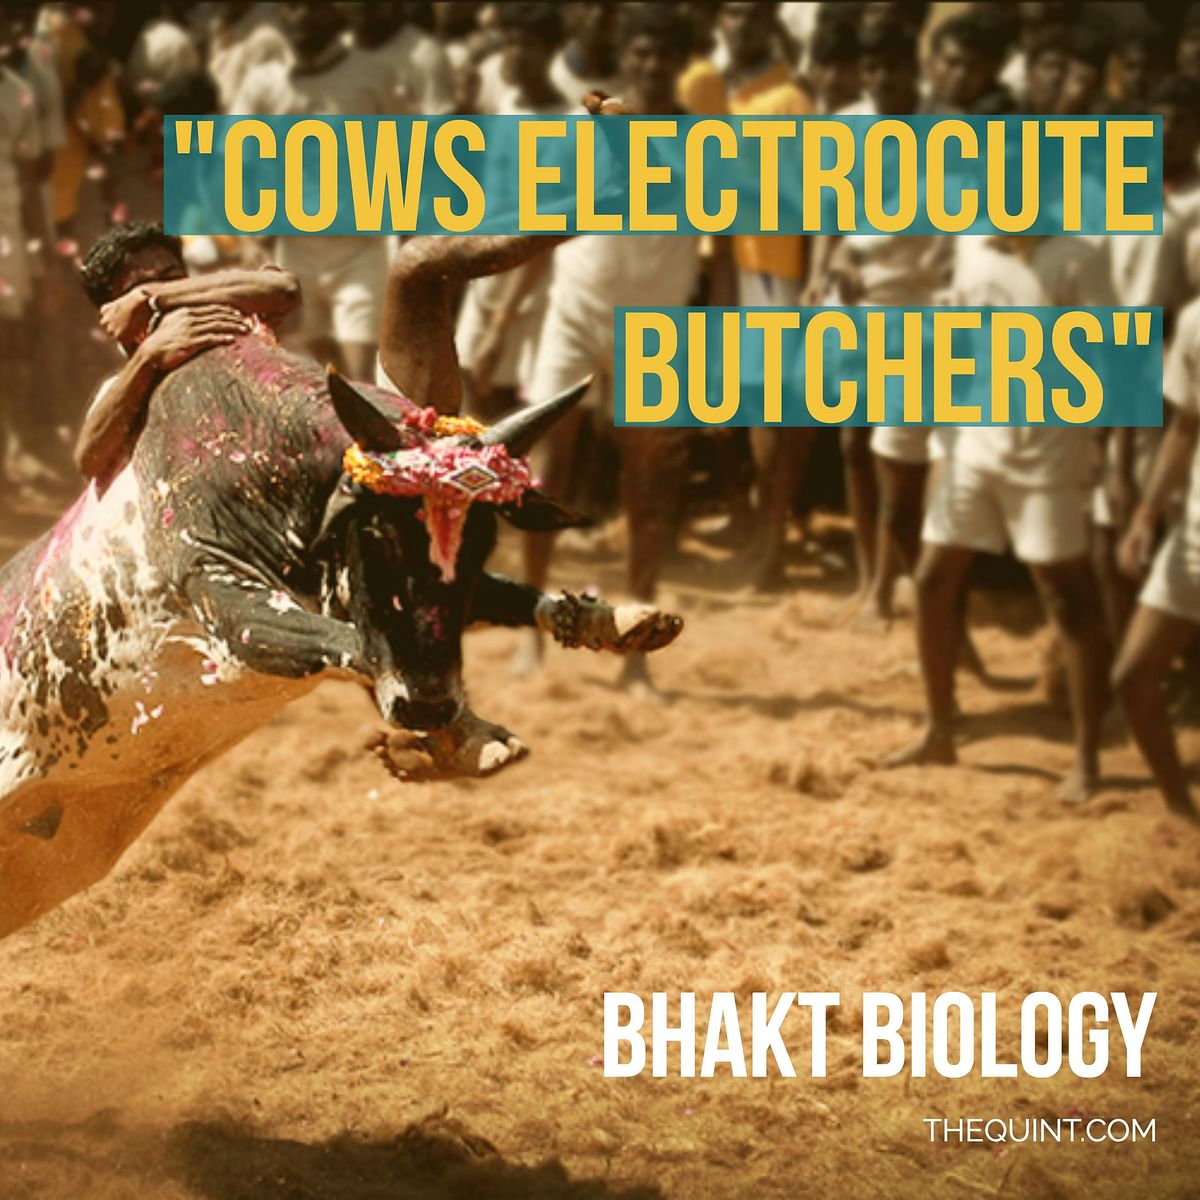 Five things you can learn from bhakts about how animal biology works, courtesy Rajasthan’s Education Minister.